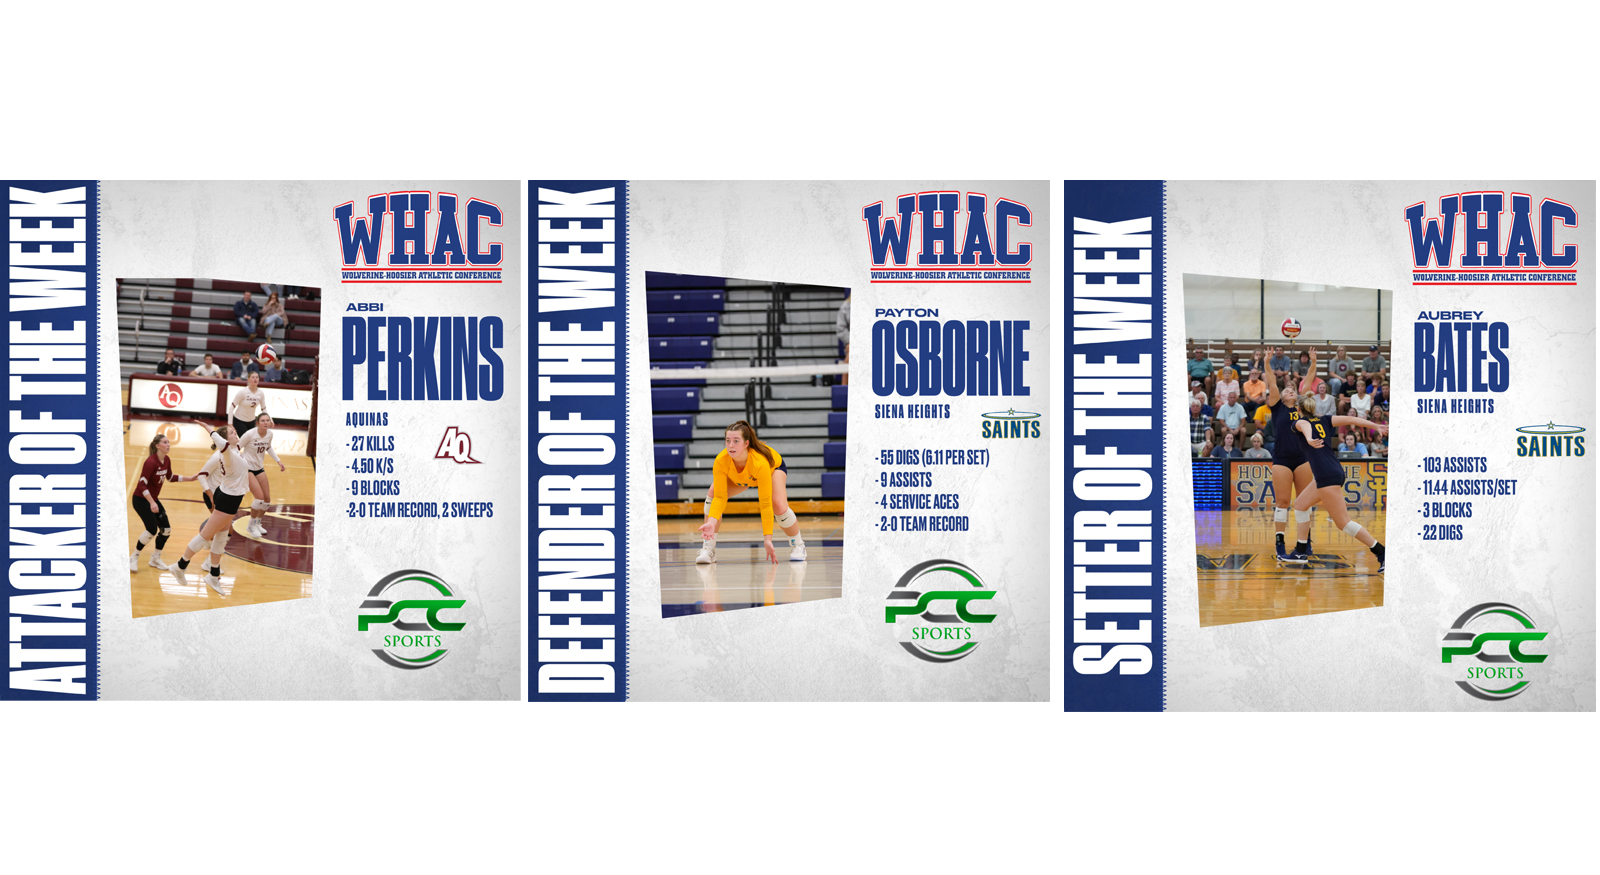 Perkins, Bates and Osborne Earn Final WHAC Weekly Volleyball Awards